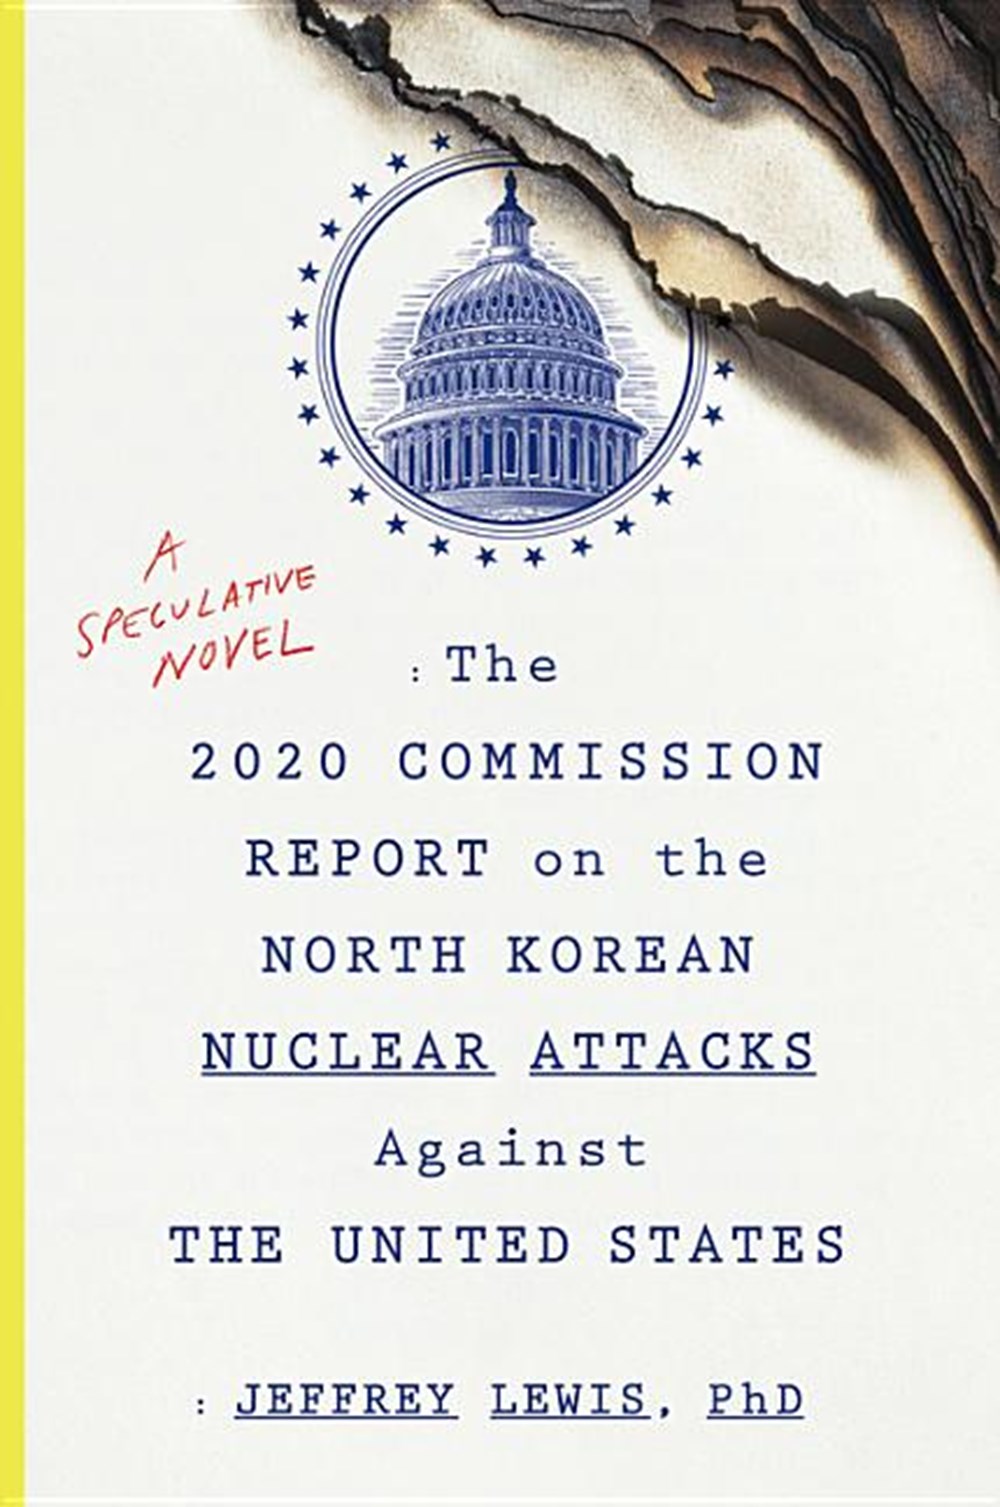 2020 Commission Report on the North Korean Nuclear Attacks Against the U.S.: A Speculative Novel